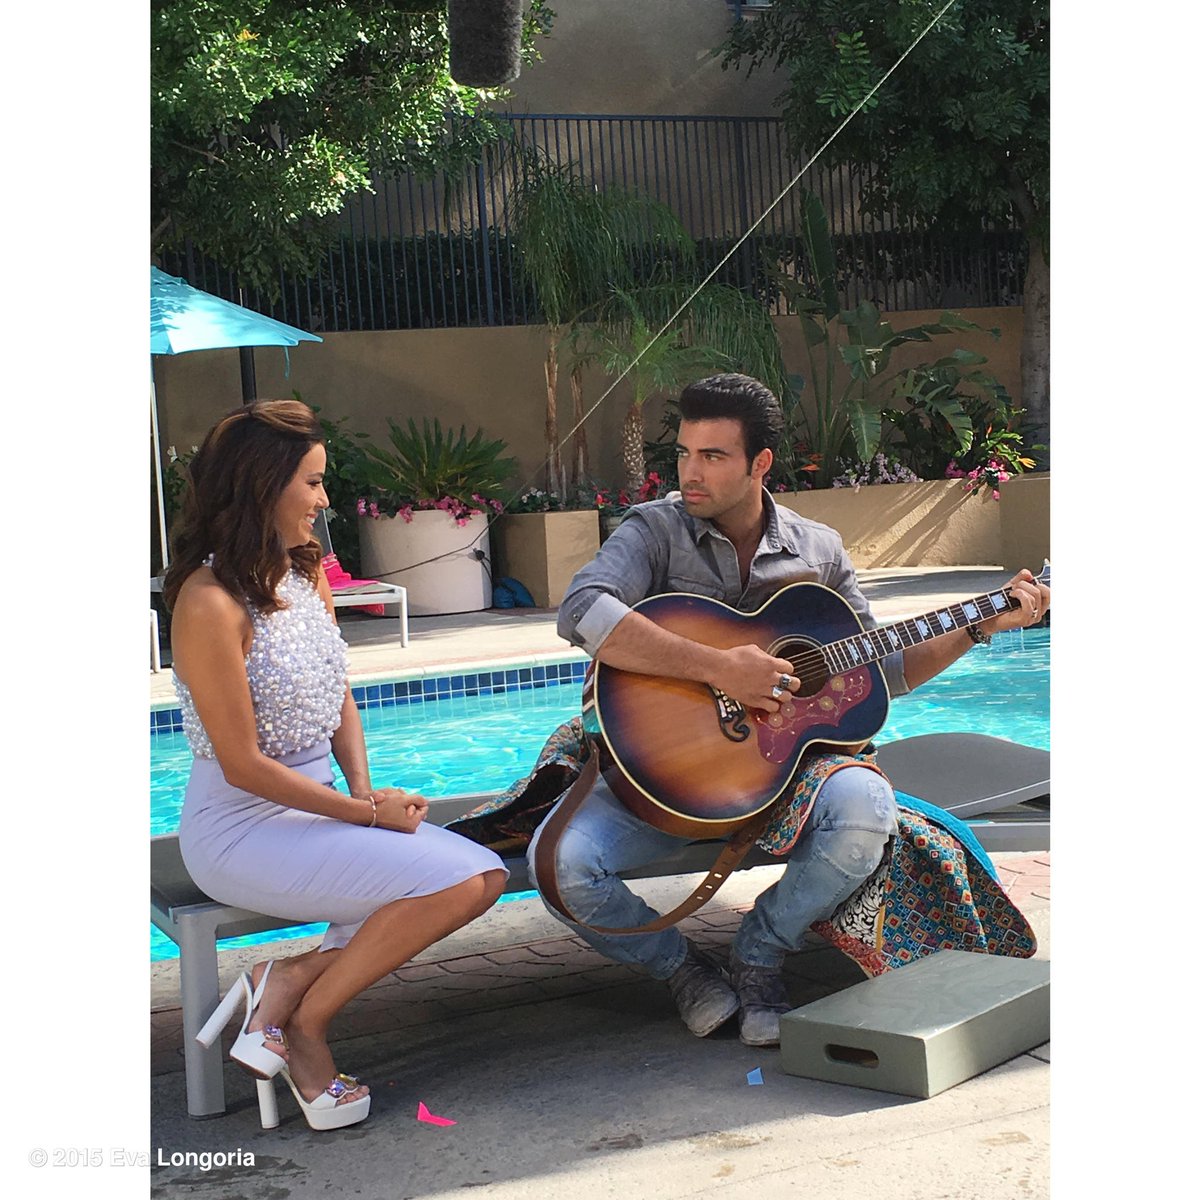 Lucky me to get serenaded by @jencarlosmusic today on set! #Telenovela #Dec7 #AfterTheVoicd https://t.co/IW73mnTb1B